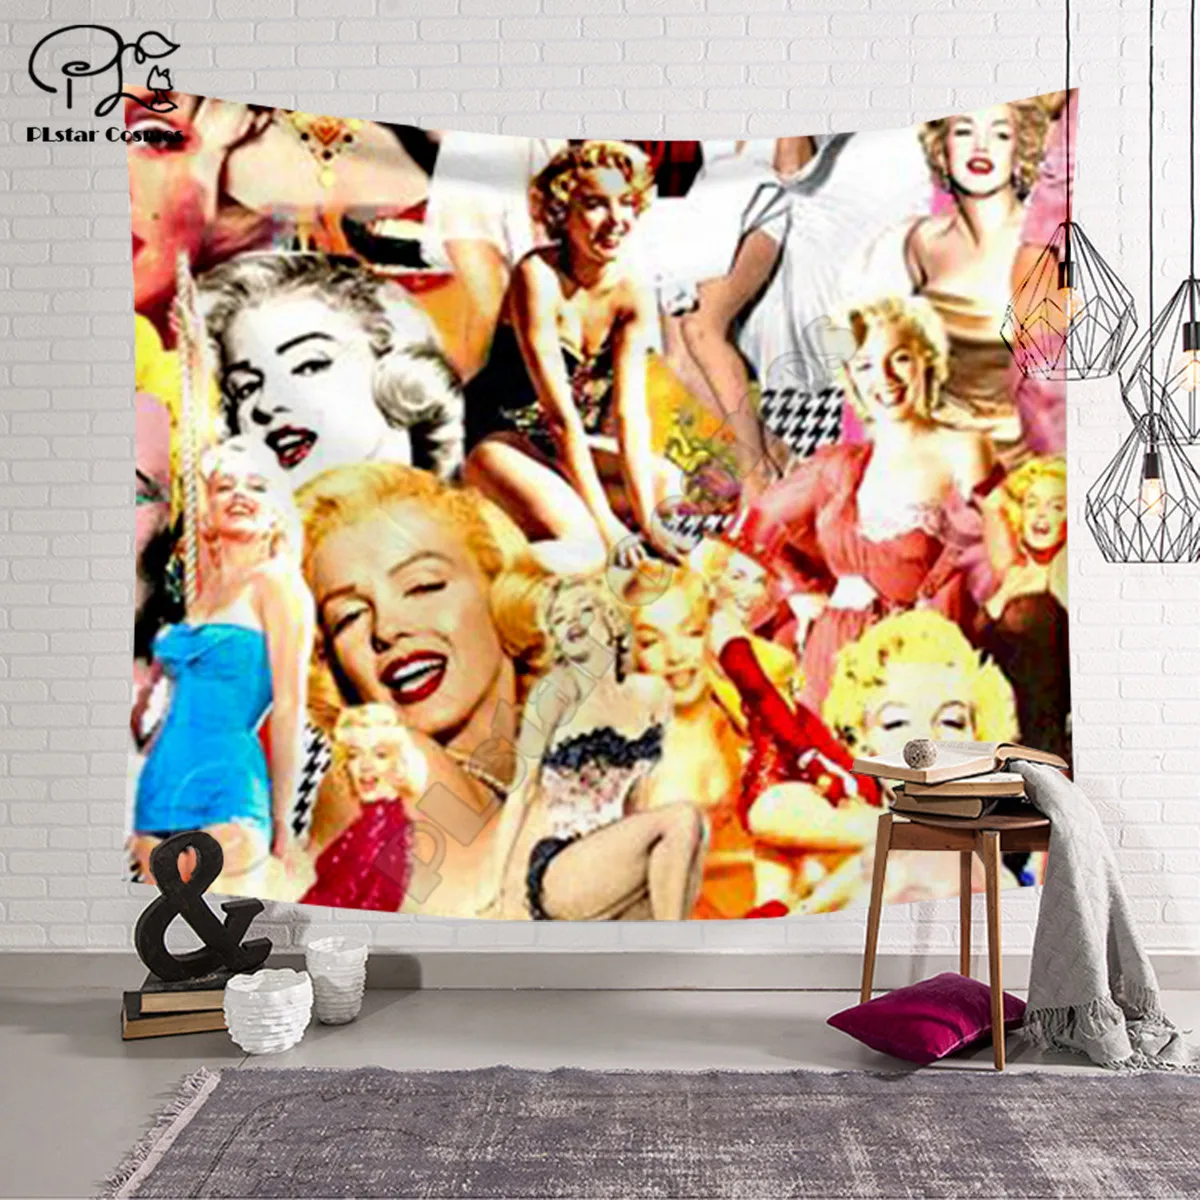 

PLstar Cosmos Tapestry Sexy Marilyn Monroe 3D Printing Tapestrying Rectangular Home Decor Wall Hanging style-4